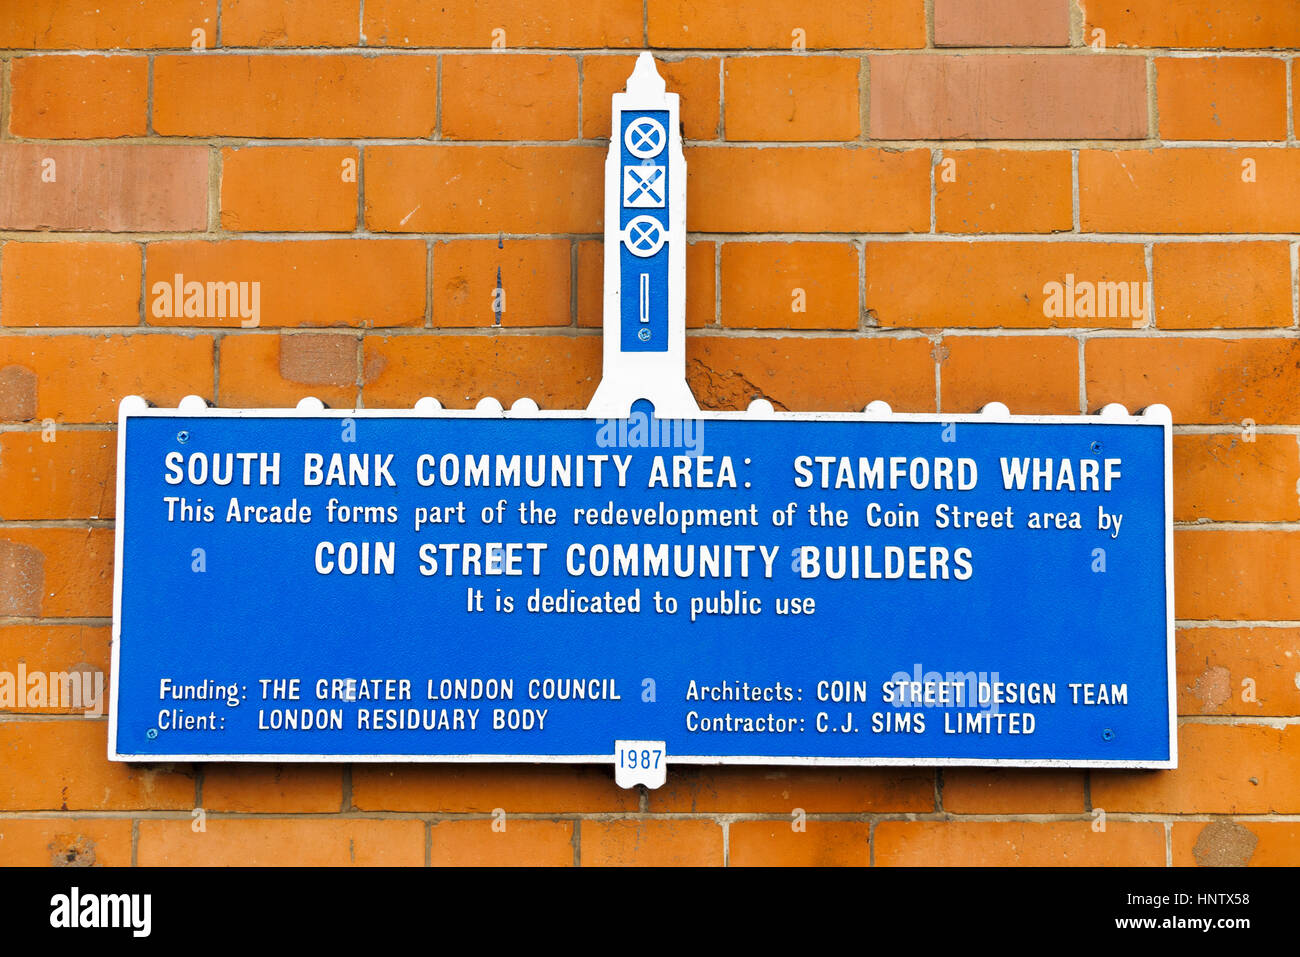 South Bank Community Area, Stamford Wharf, part of the Coin Street area urban regeneration project, redeveloped by Coin Street Community Builders Stock Photo